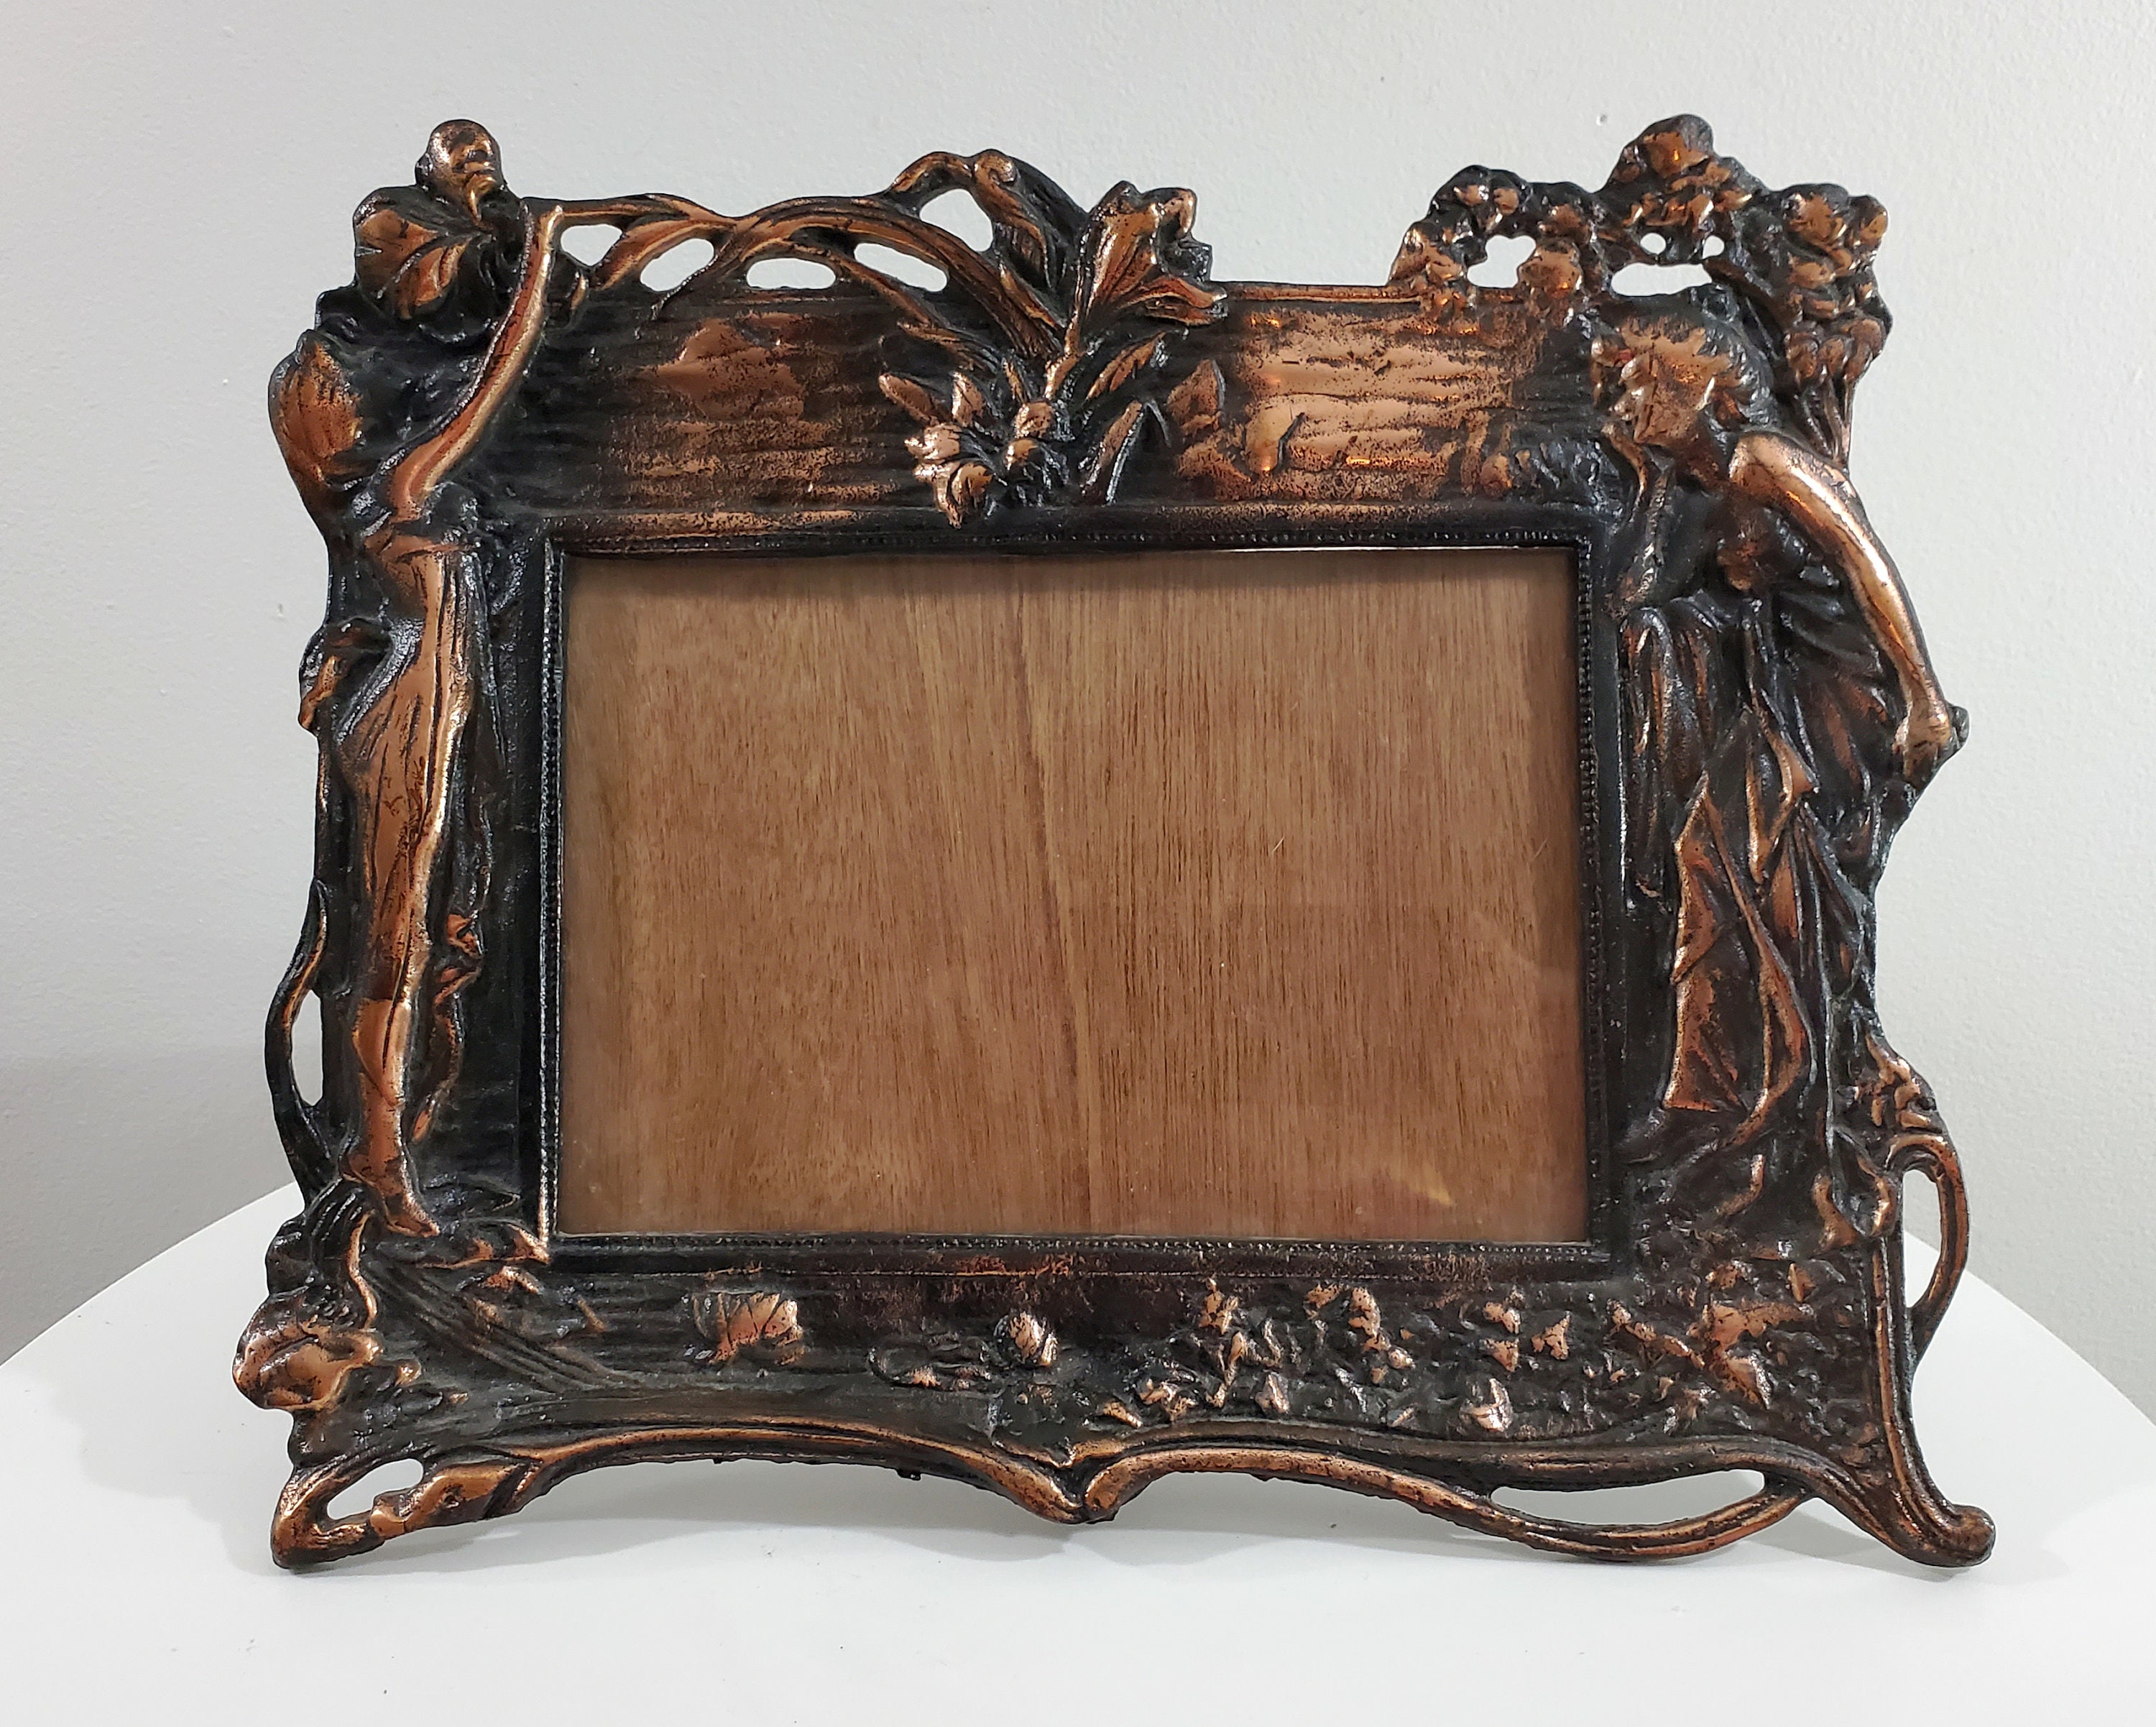 Steampunk Picture Frame - 6x4 Copper Photo – The Little Vintage Lamp Co